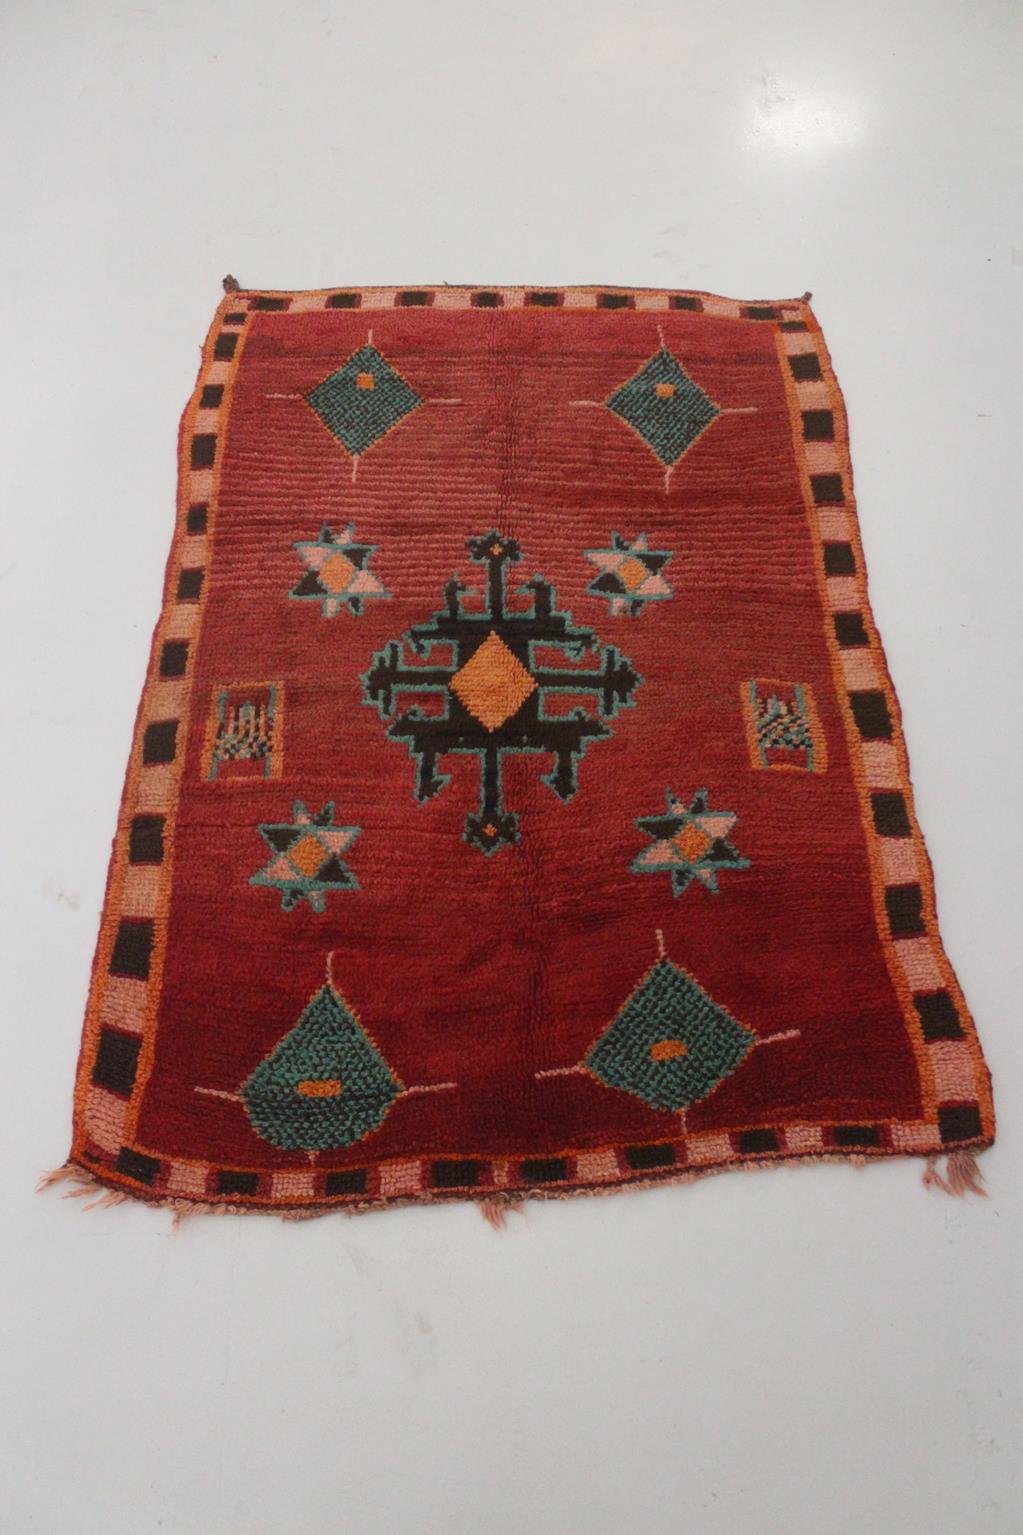 20th Century Vintage Moroccan Azilal rug - Red and turquoise - 4.1x5.8feet / 127x177cm For Sale